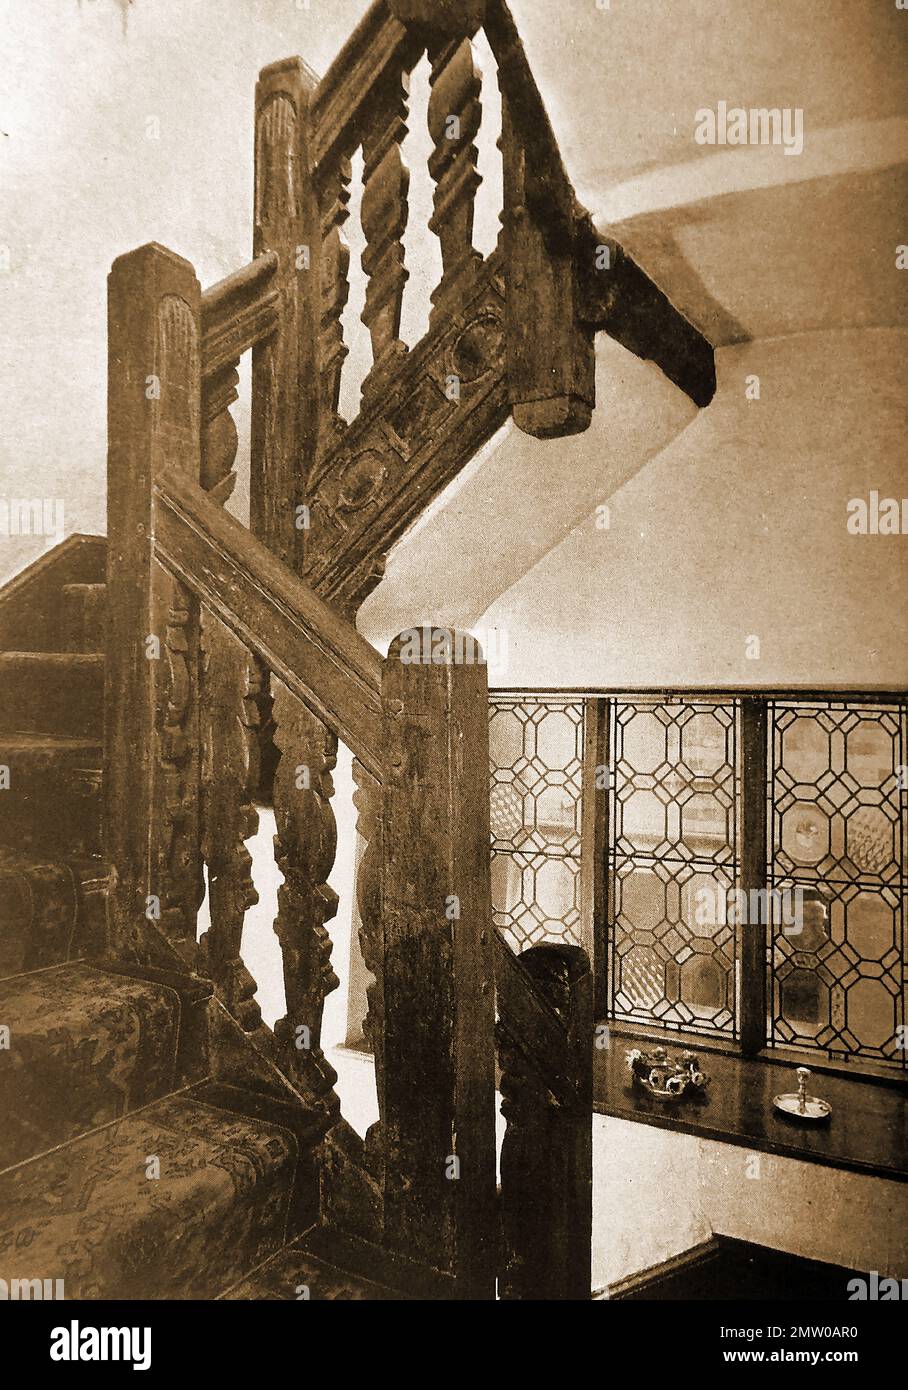 British pubs inns & taverns - A circa 1940 old photograph of the Elizabethan staircase at the Bull in Denbigh, carved with the crest of the Myddelton family.jpg - 2M Stock Photo